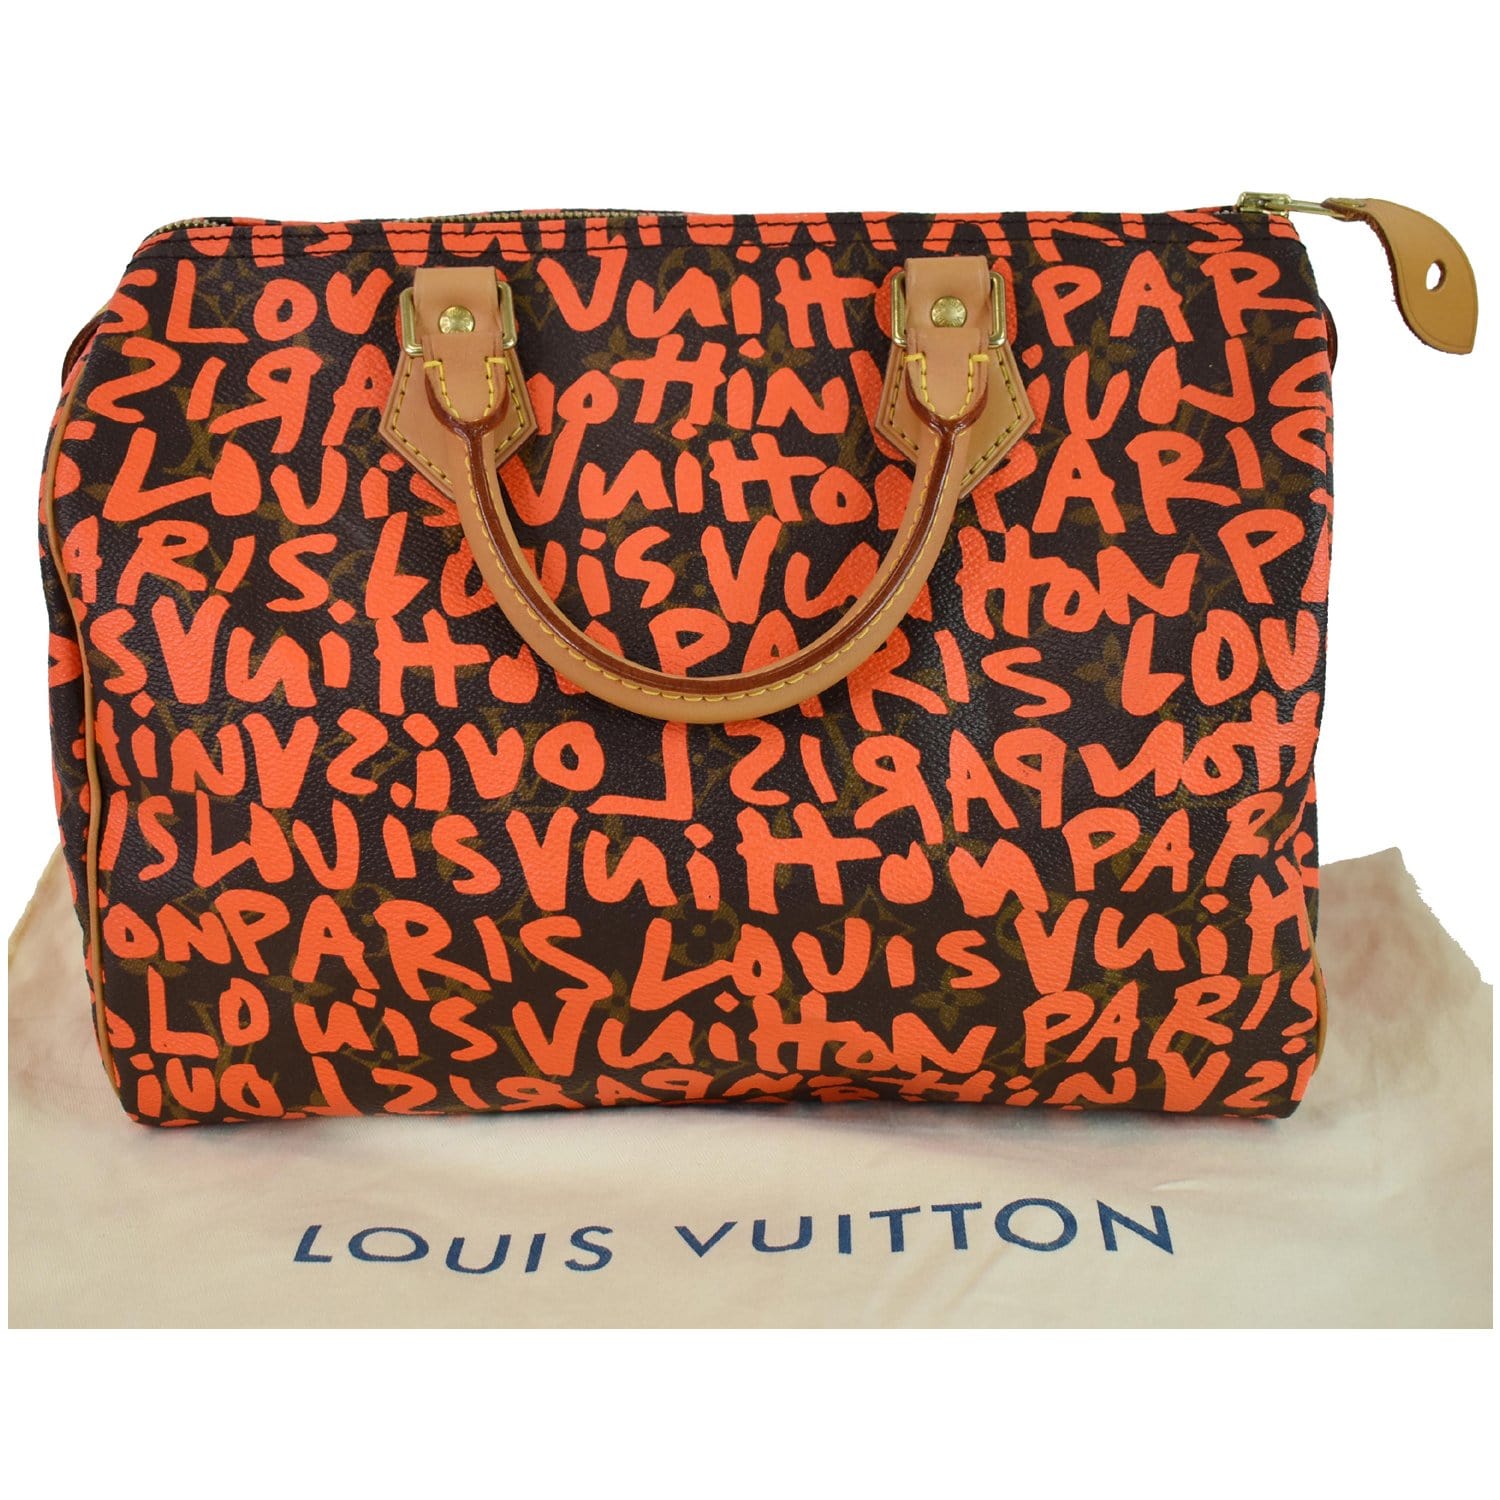 Louis Vuitton Limited Edition Monogram Graffiti Speedy 30 Satchel for Sale  in Queens, NY - OfferUp